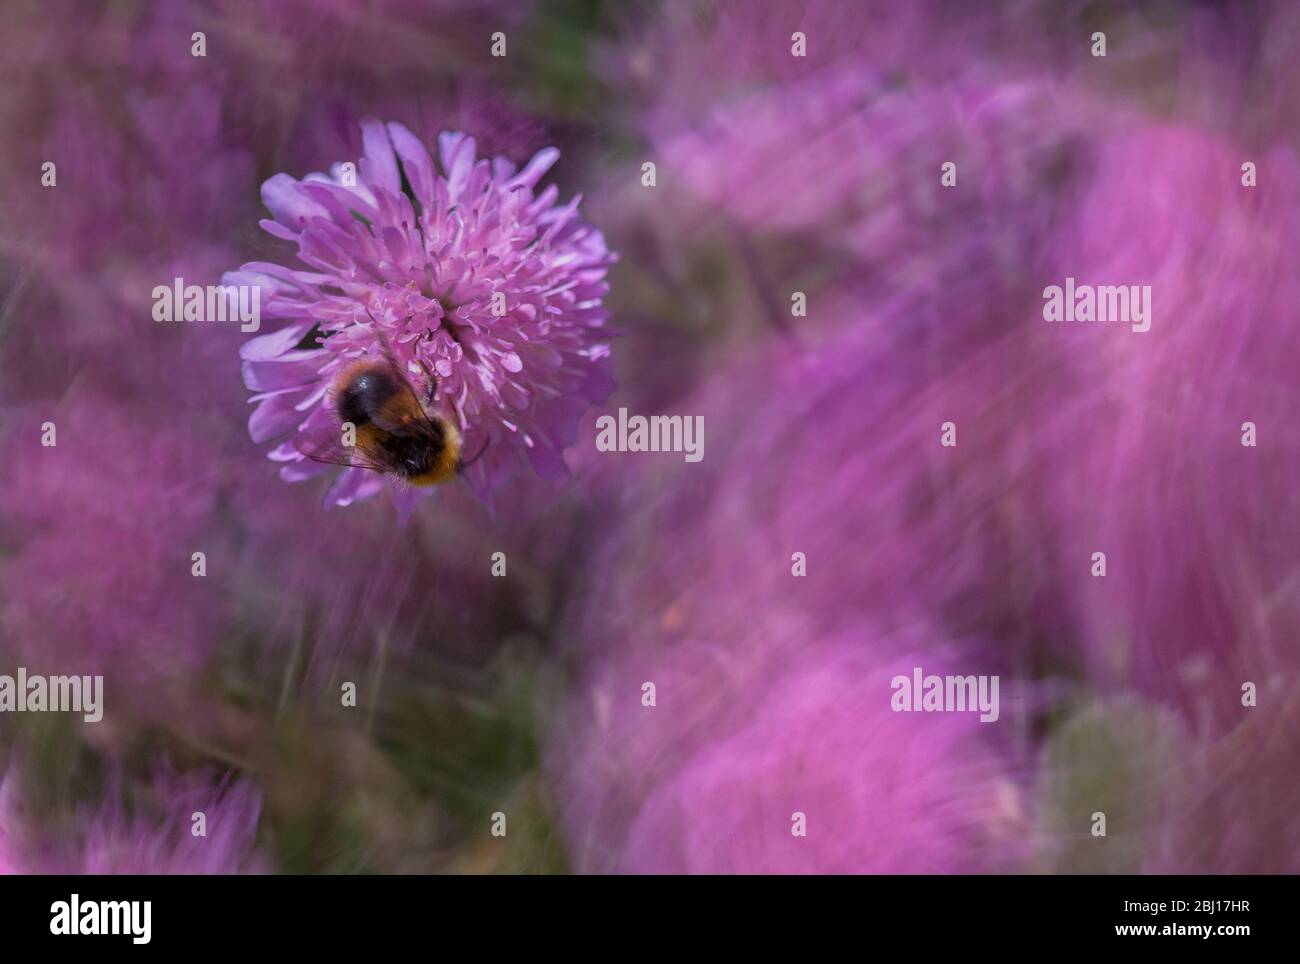 A delicate lilac coloured scabious flower in focus in the foreground with a bee, and movement blur of the flower moving in the wind in the background. Stock Photo